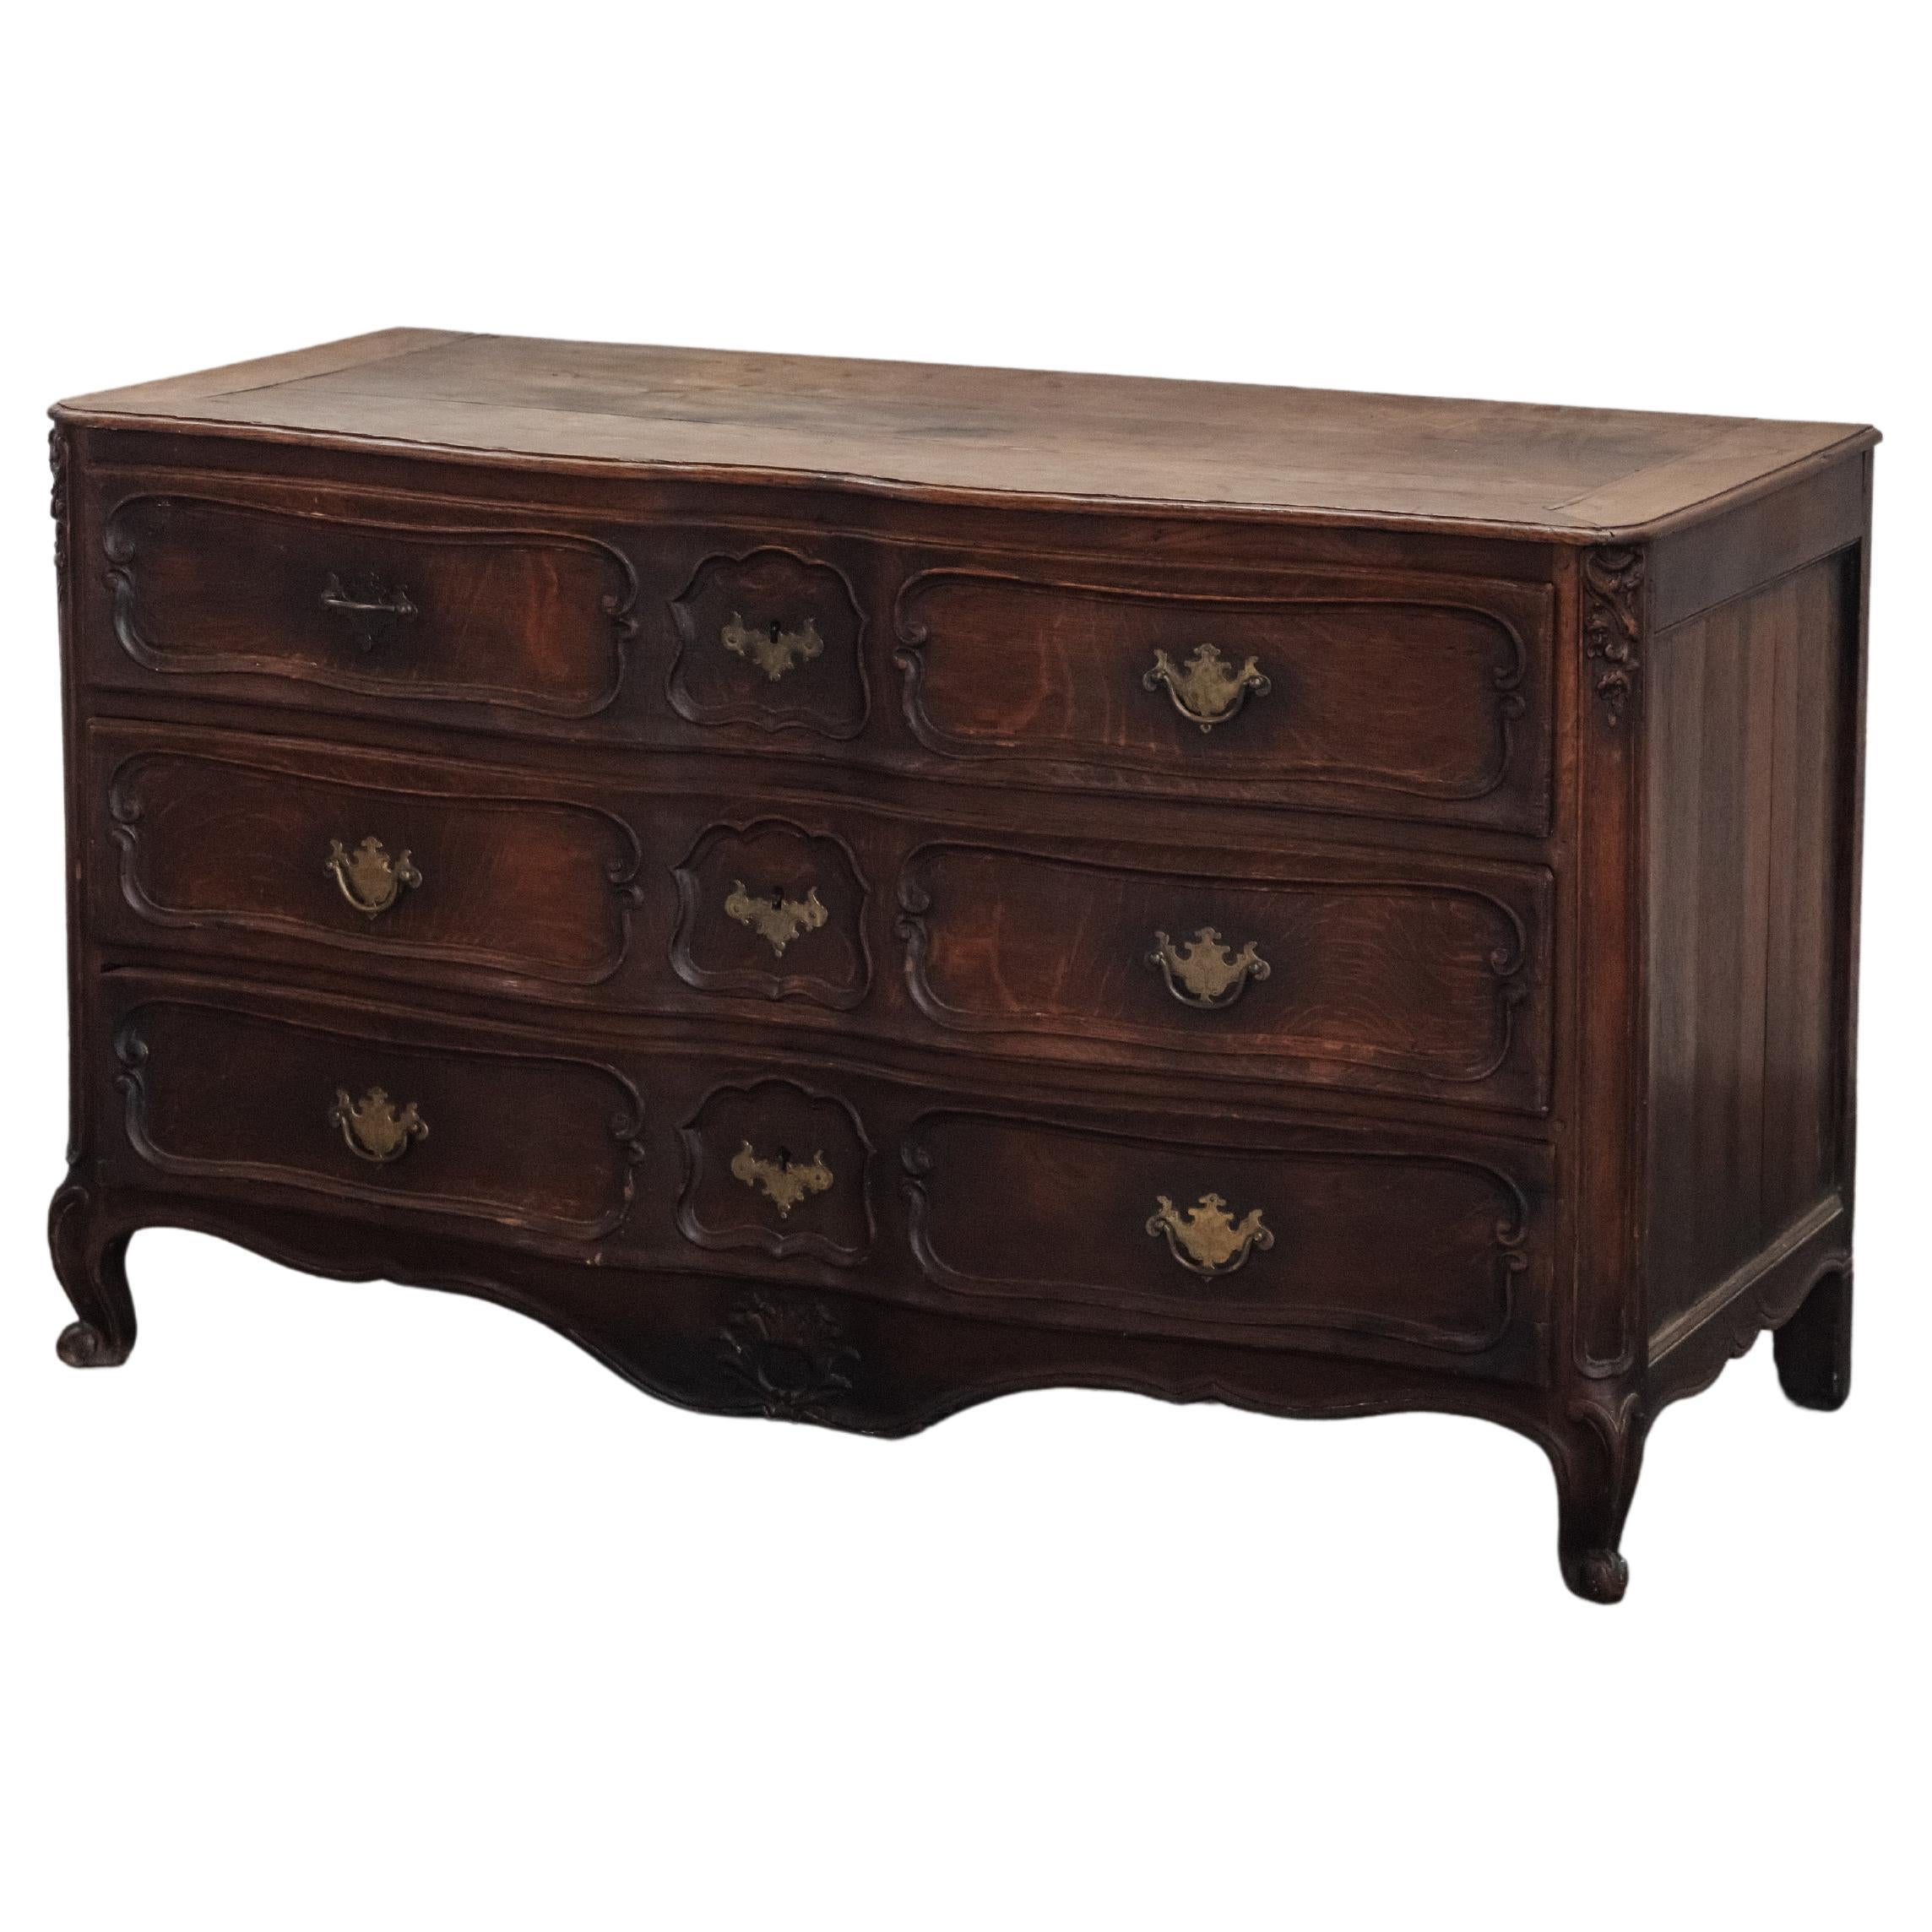 Early Oak Chest From France, Circa 1800